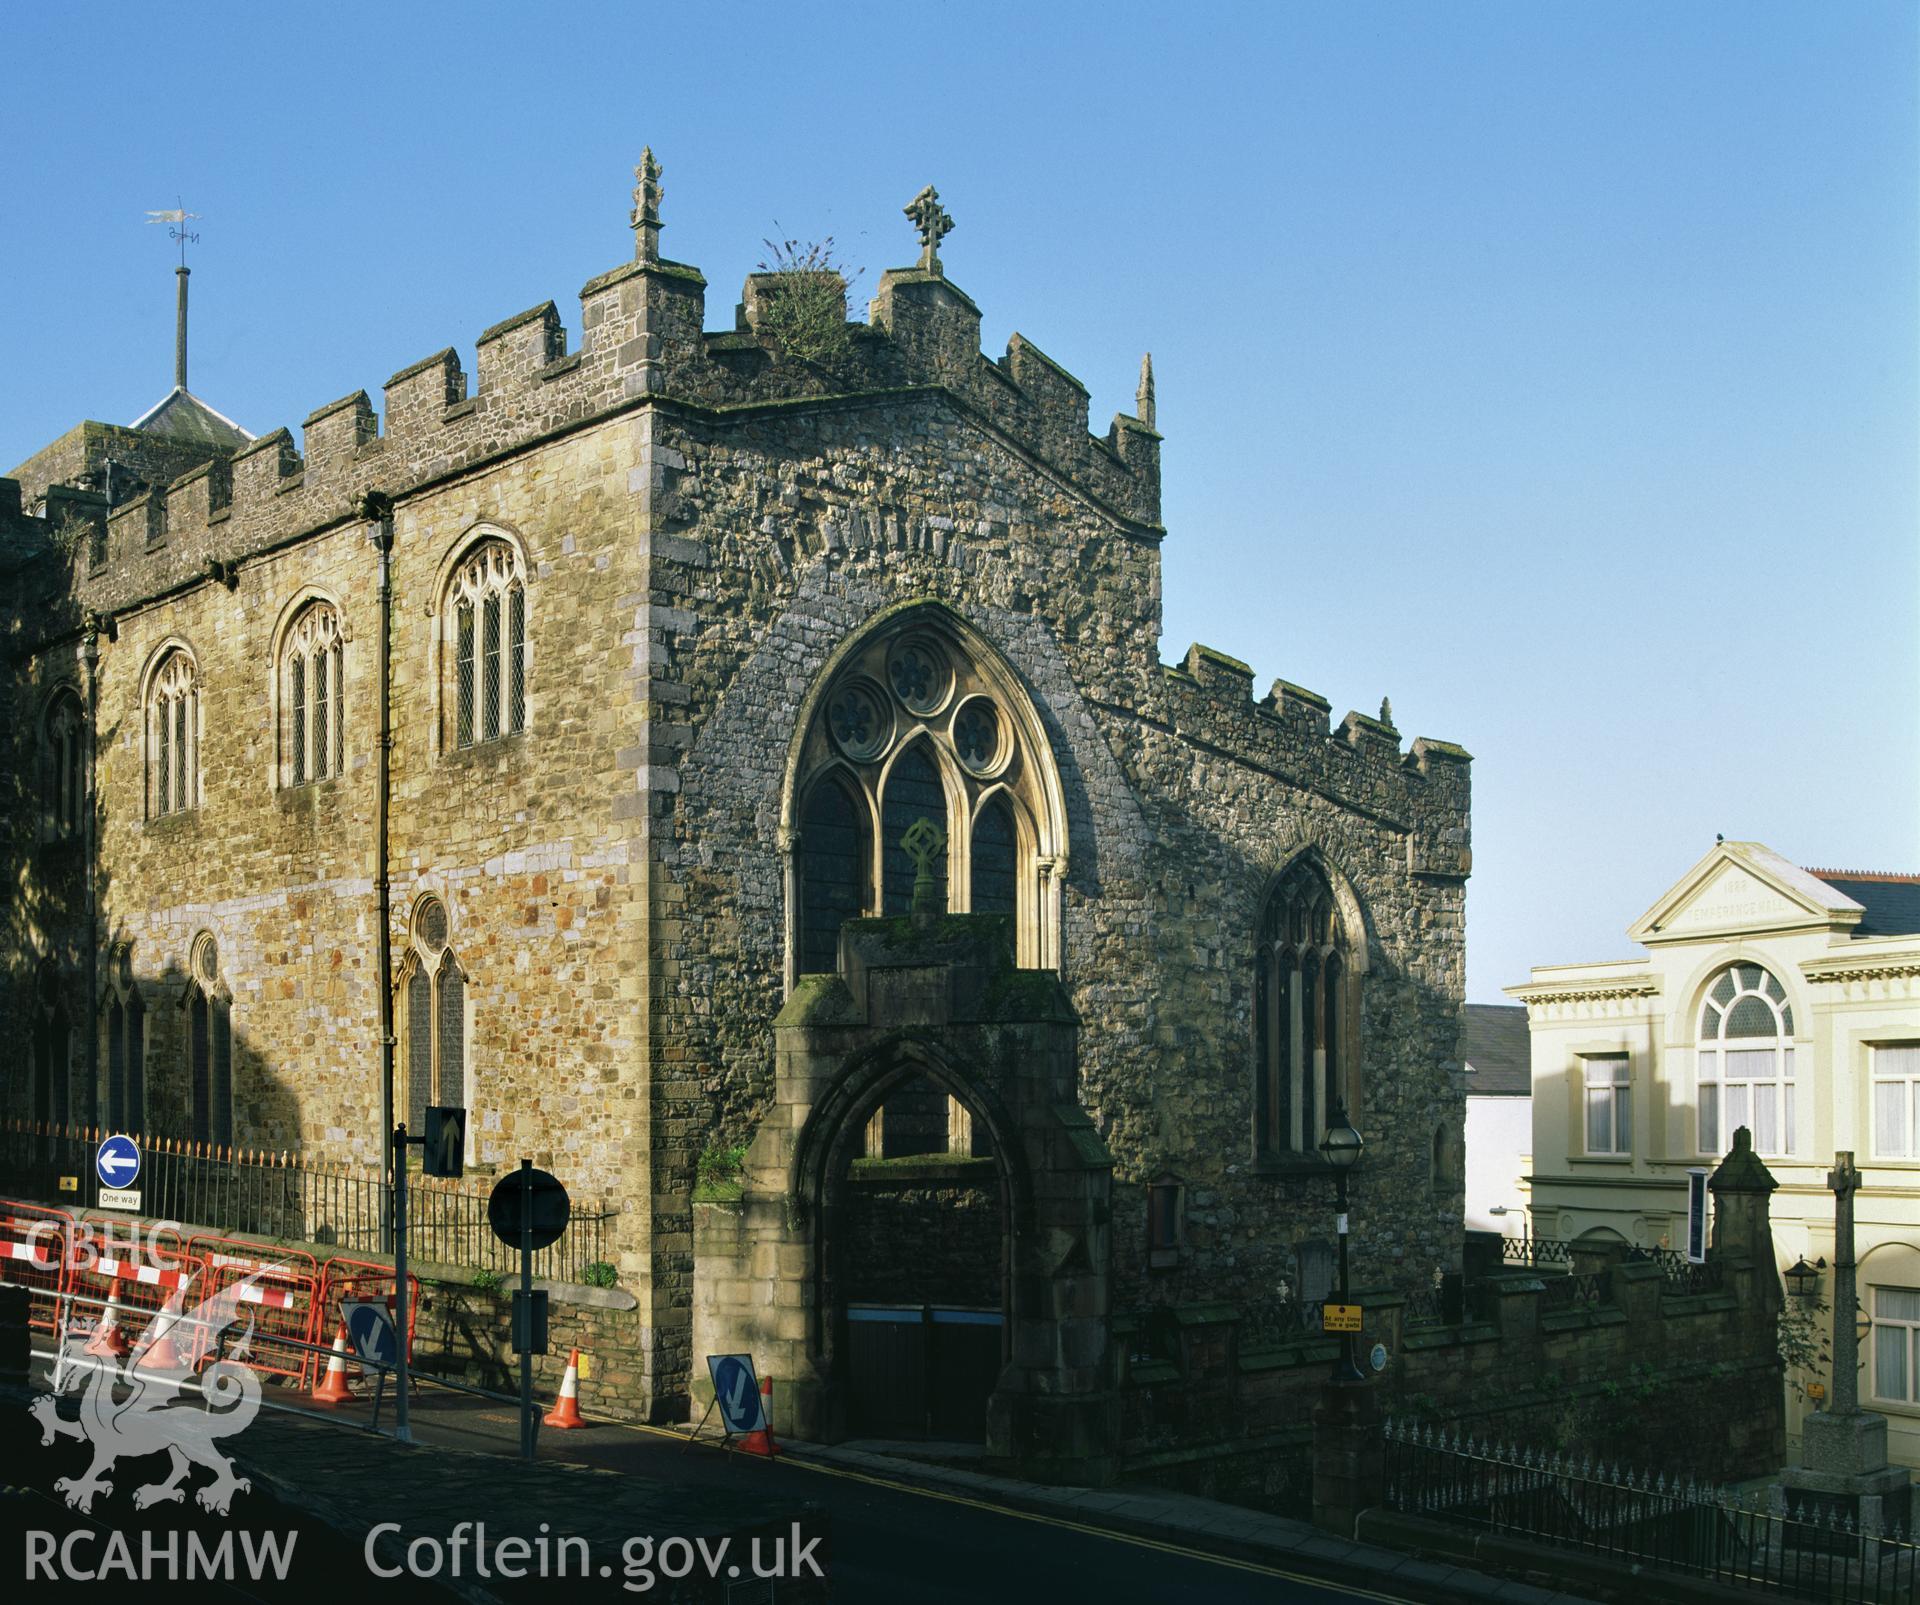 RCAHMW colour transparency showing exterior view of St Marys Church, Haverfordwest, taken by Iain Wright, 2003.